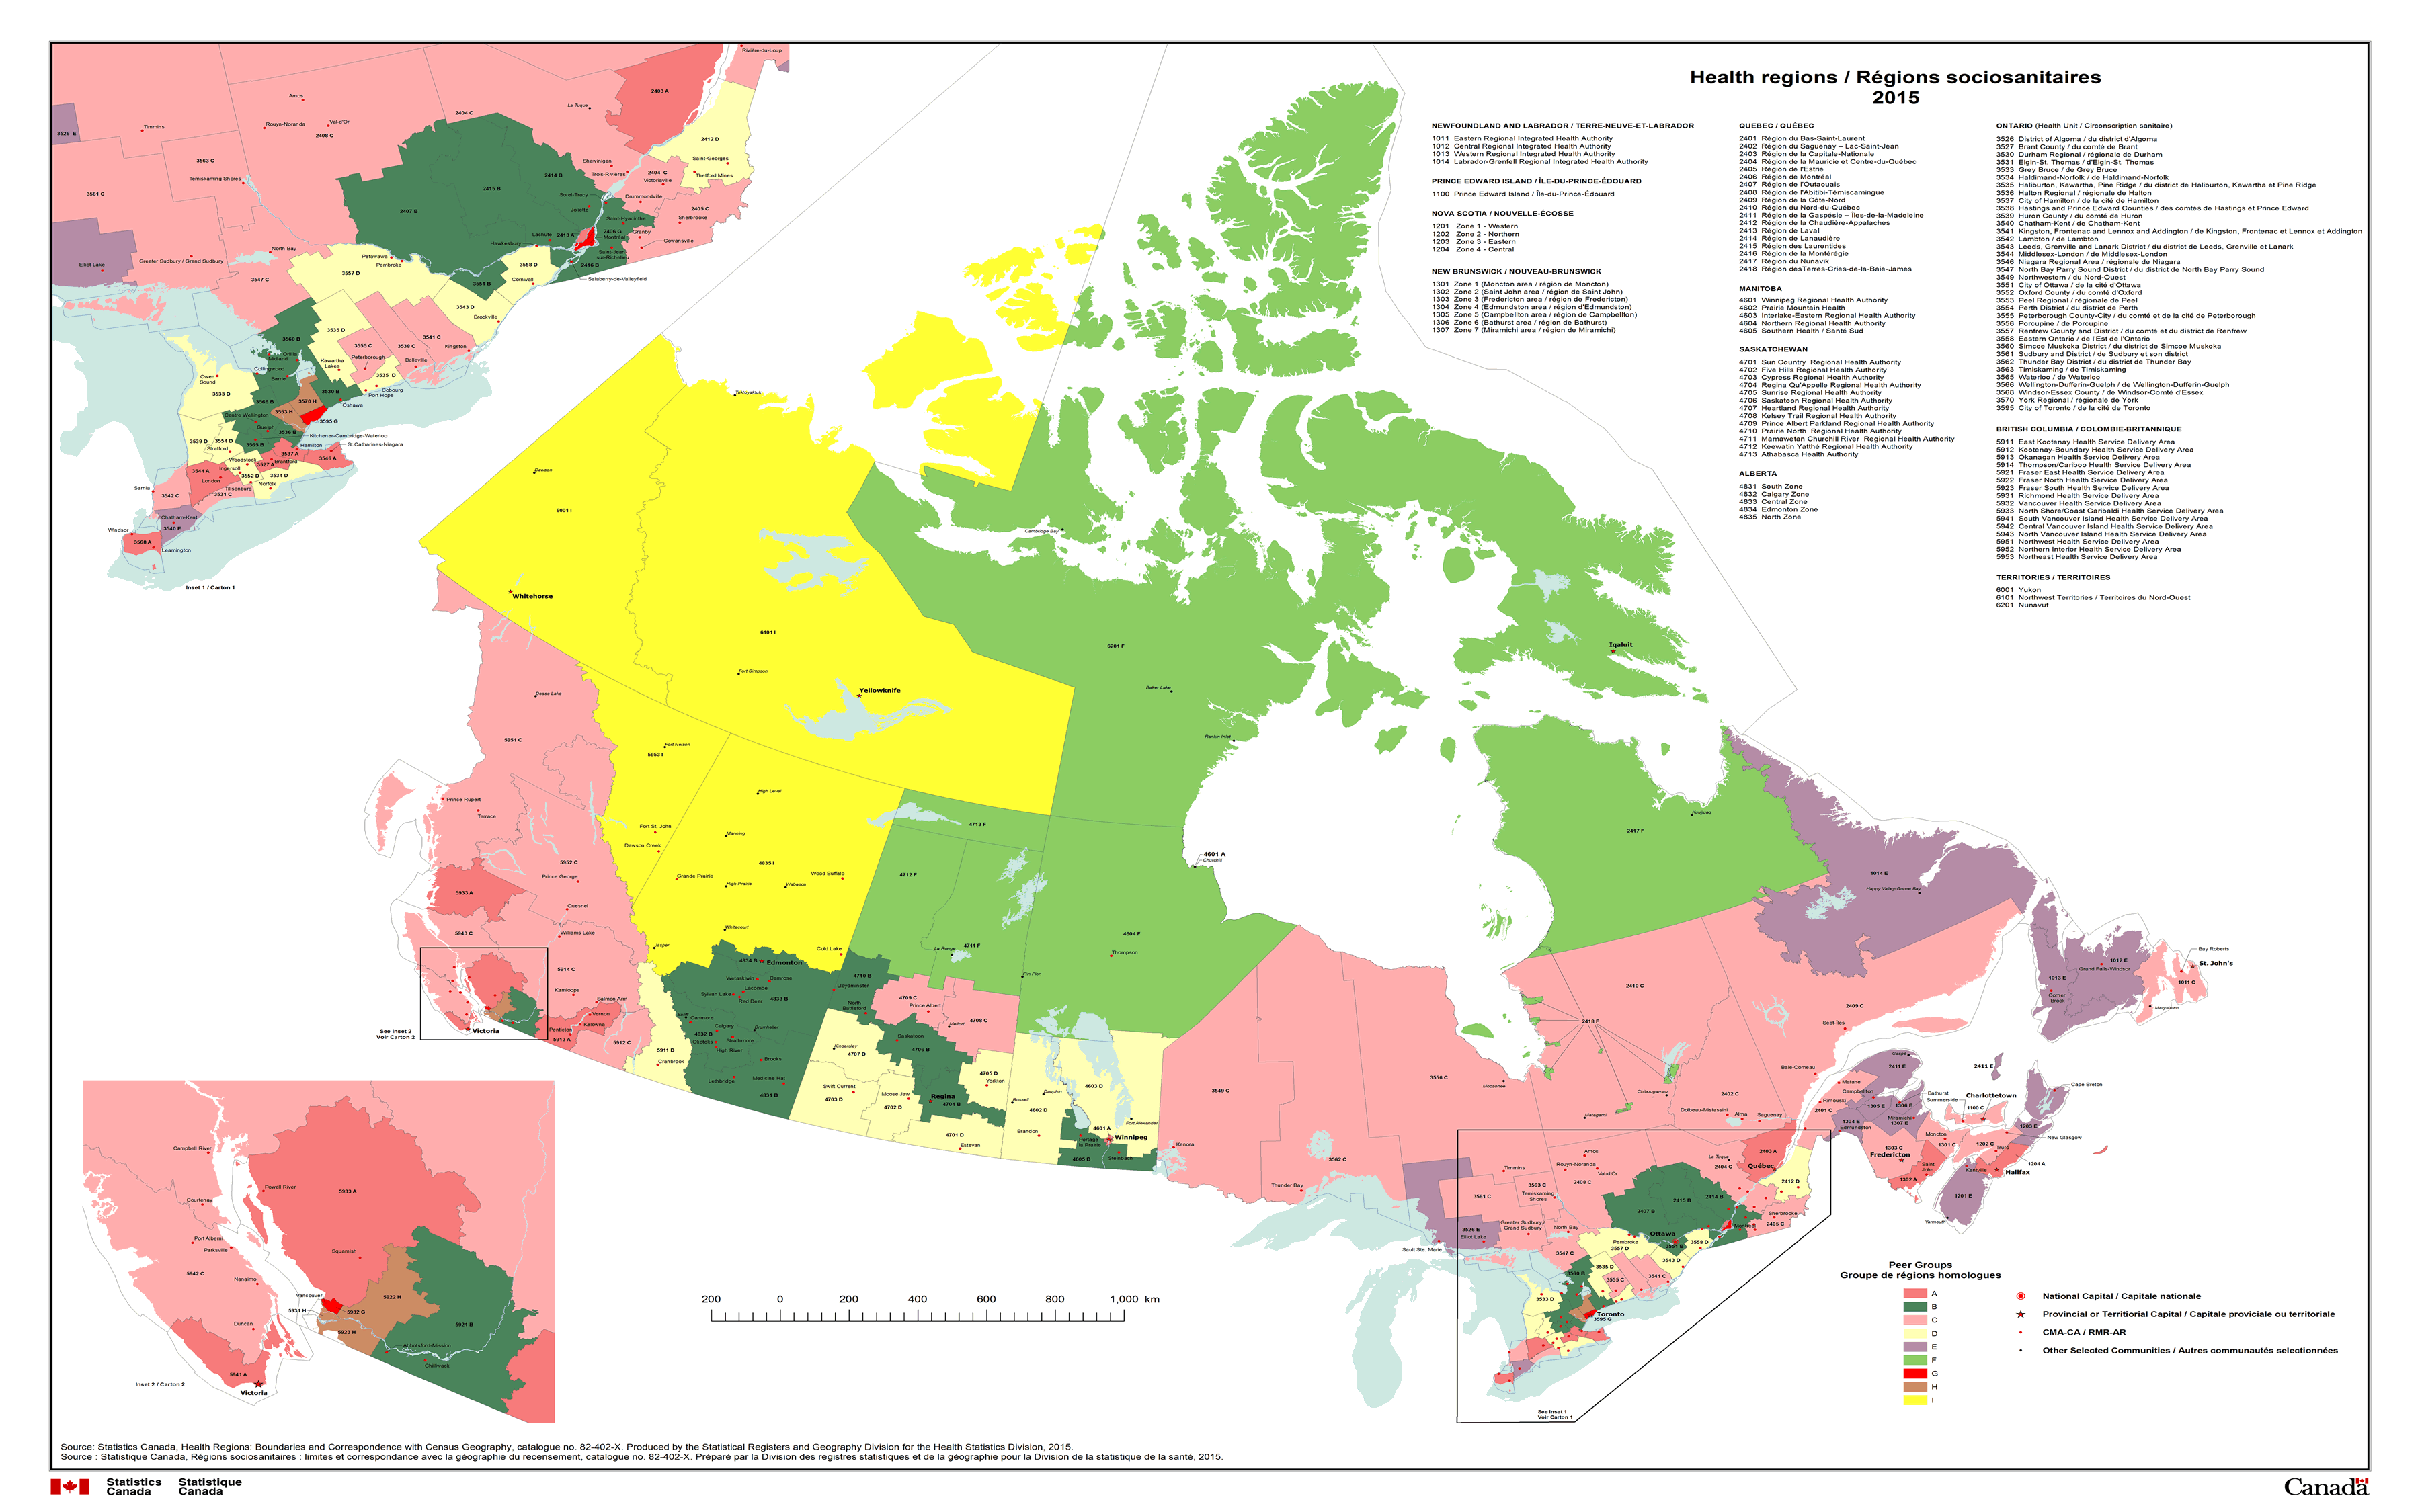 Map 14 Health Regions and Peer Groups in Canada, 2015